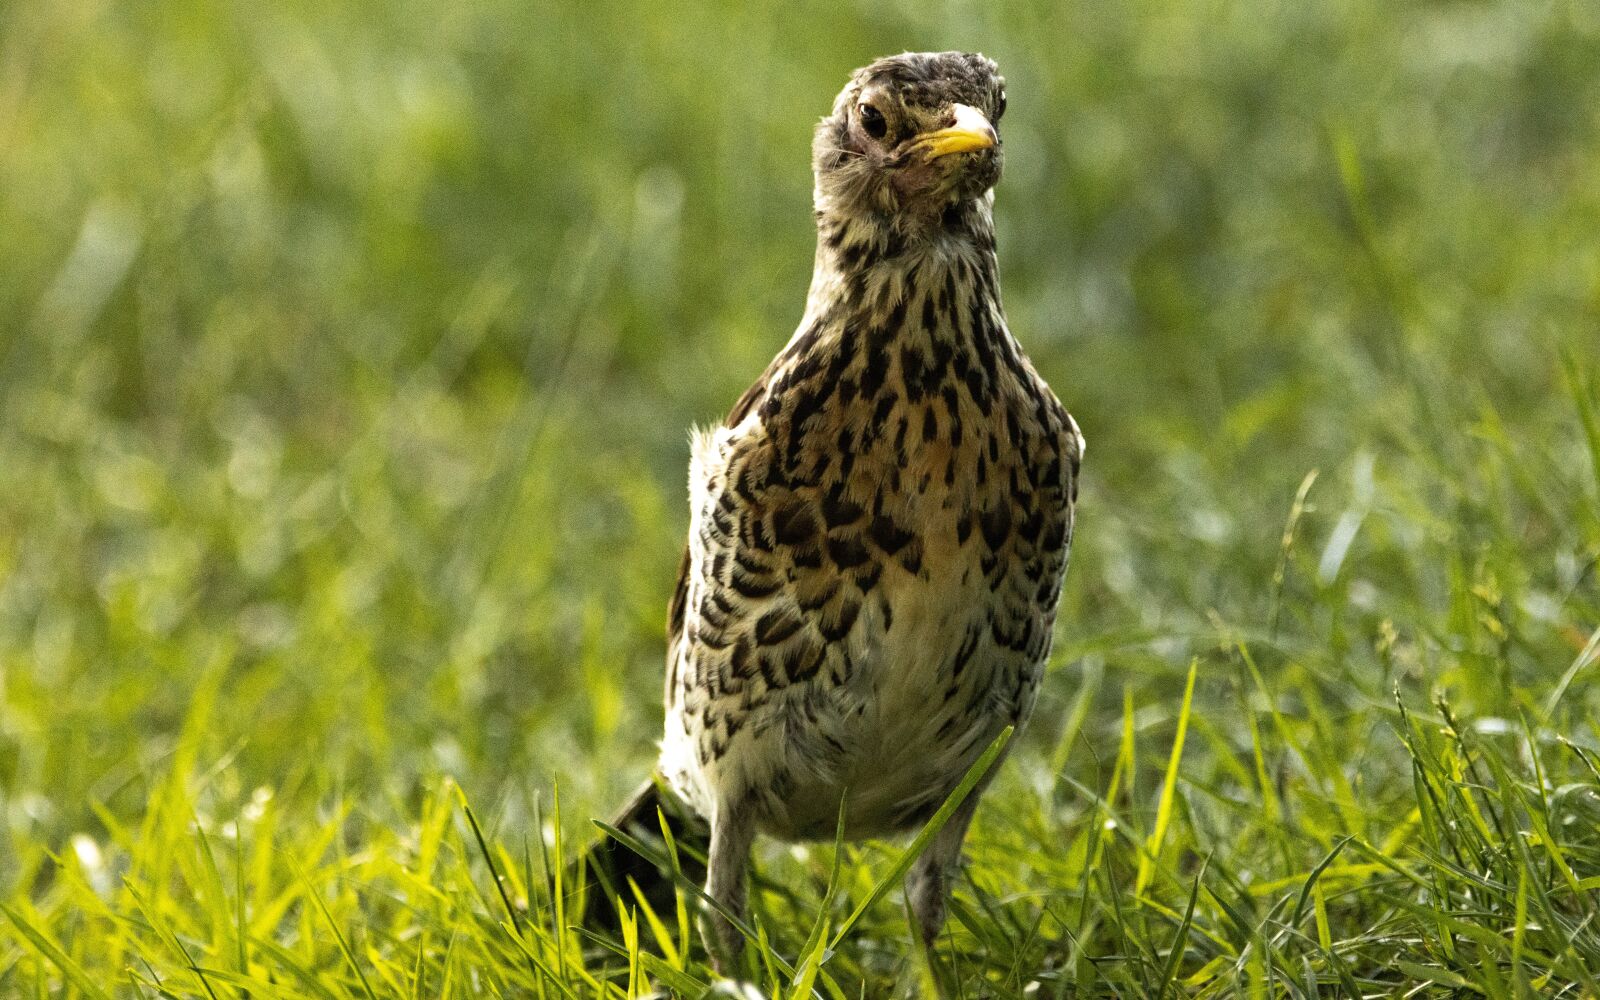 150-600mm F5-6.3 DG OS HSM | Contemporary 015 sample photo. Song thrush, grass, nature photography